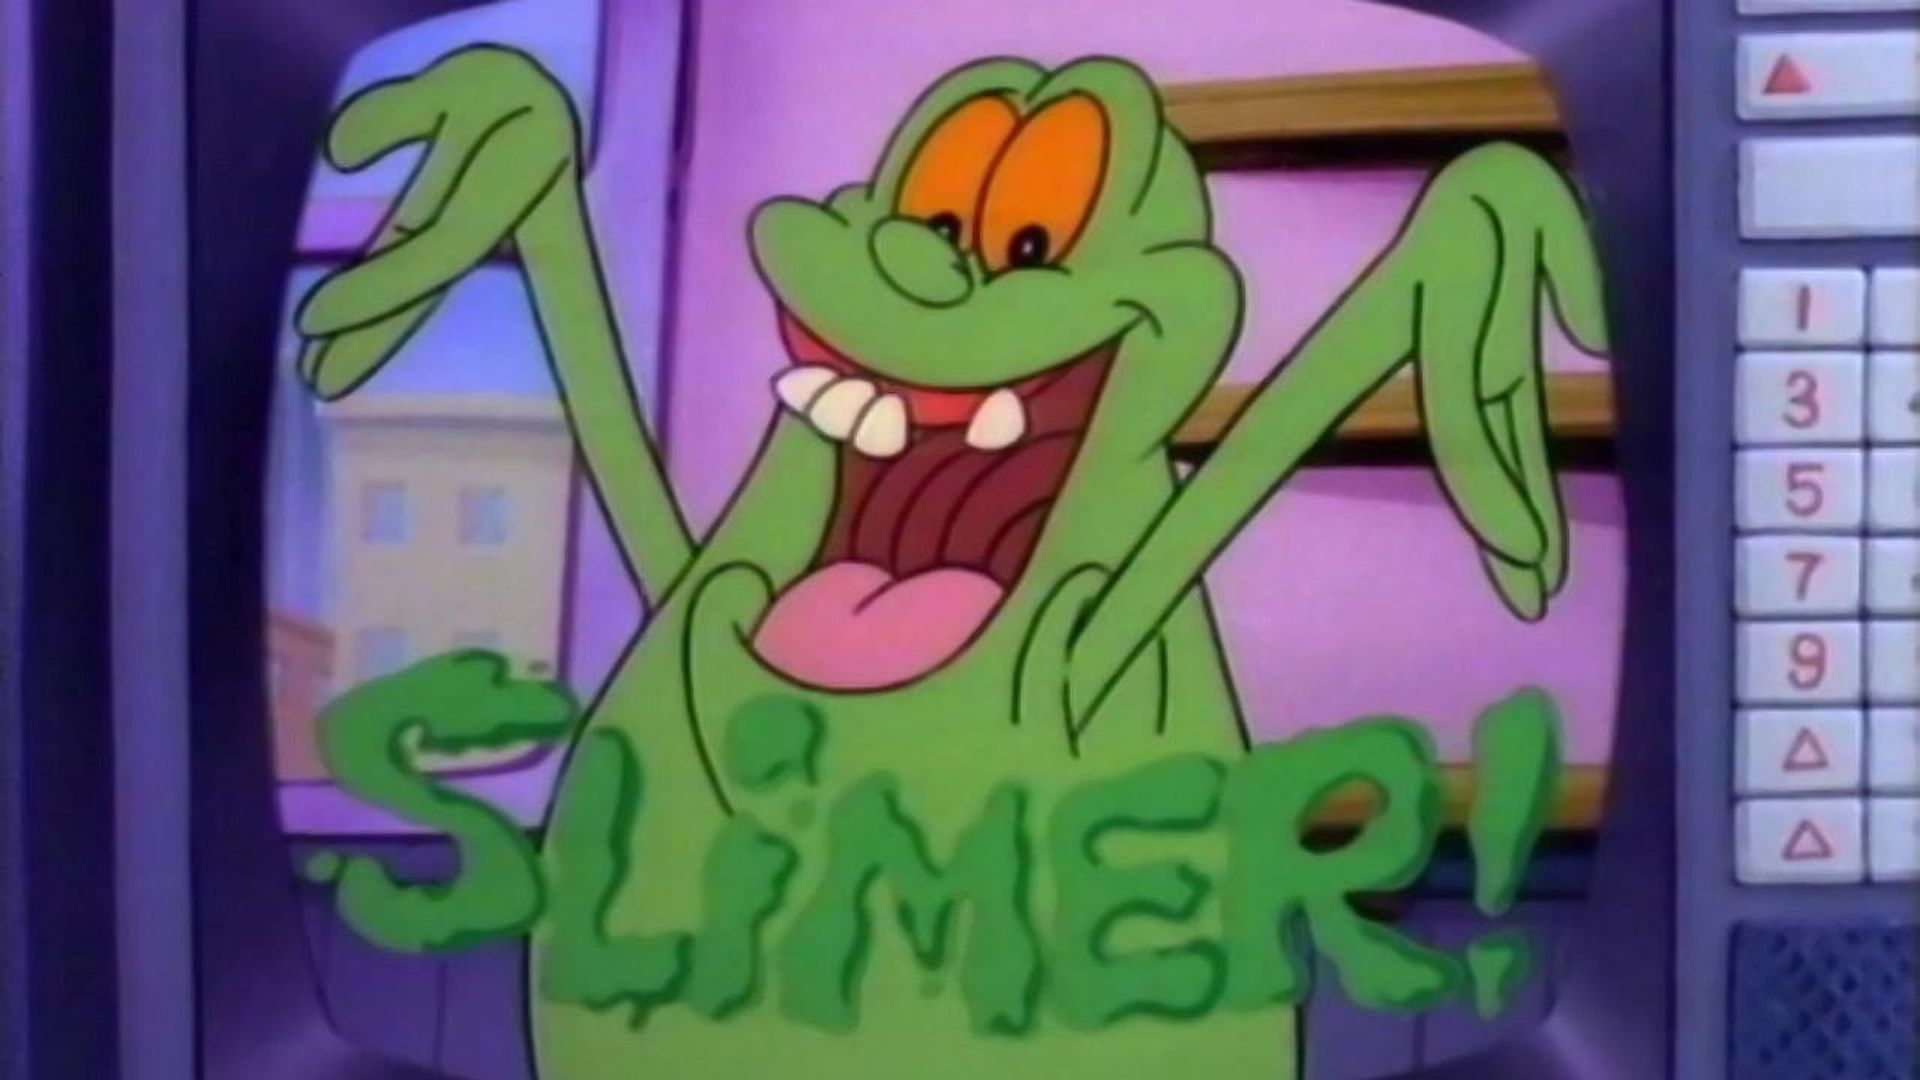 Slimer! And the Real Ghostbusters background